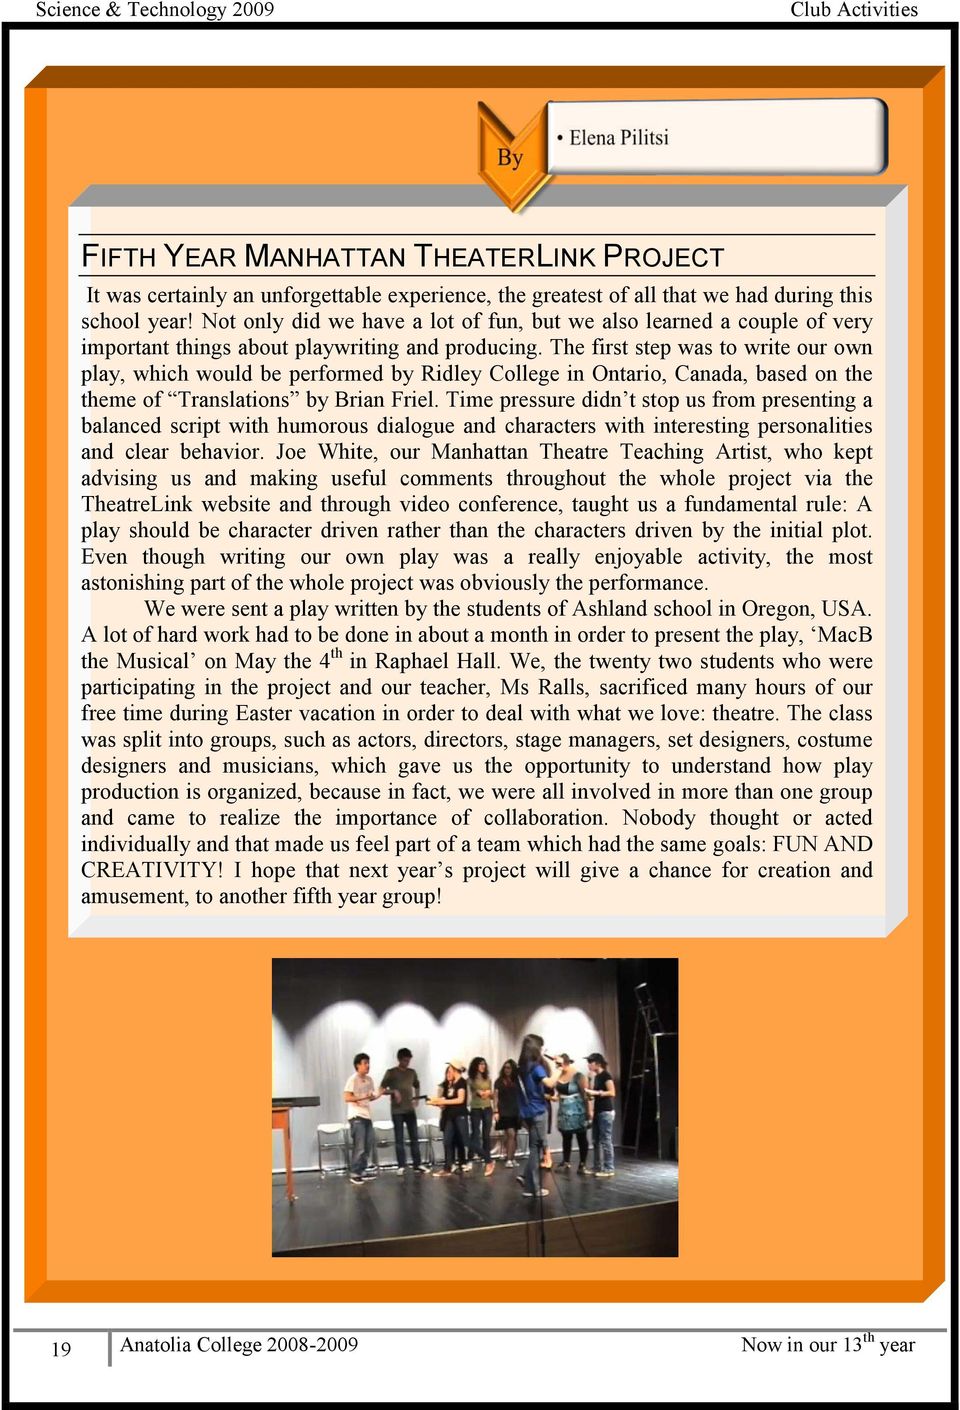 The first step was to write our own play, which would be performed by Ridley College in Ontario, Canada, based on the theme of Translations by Brian Friel.